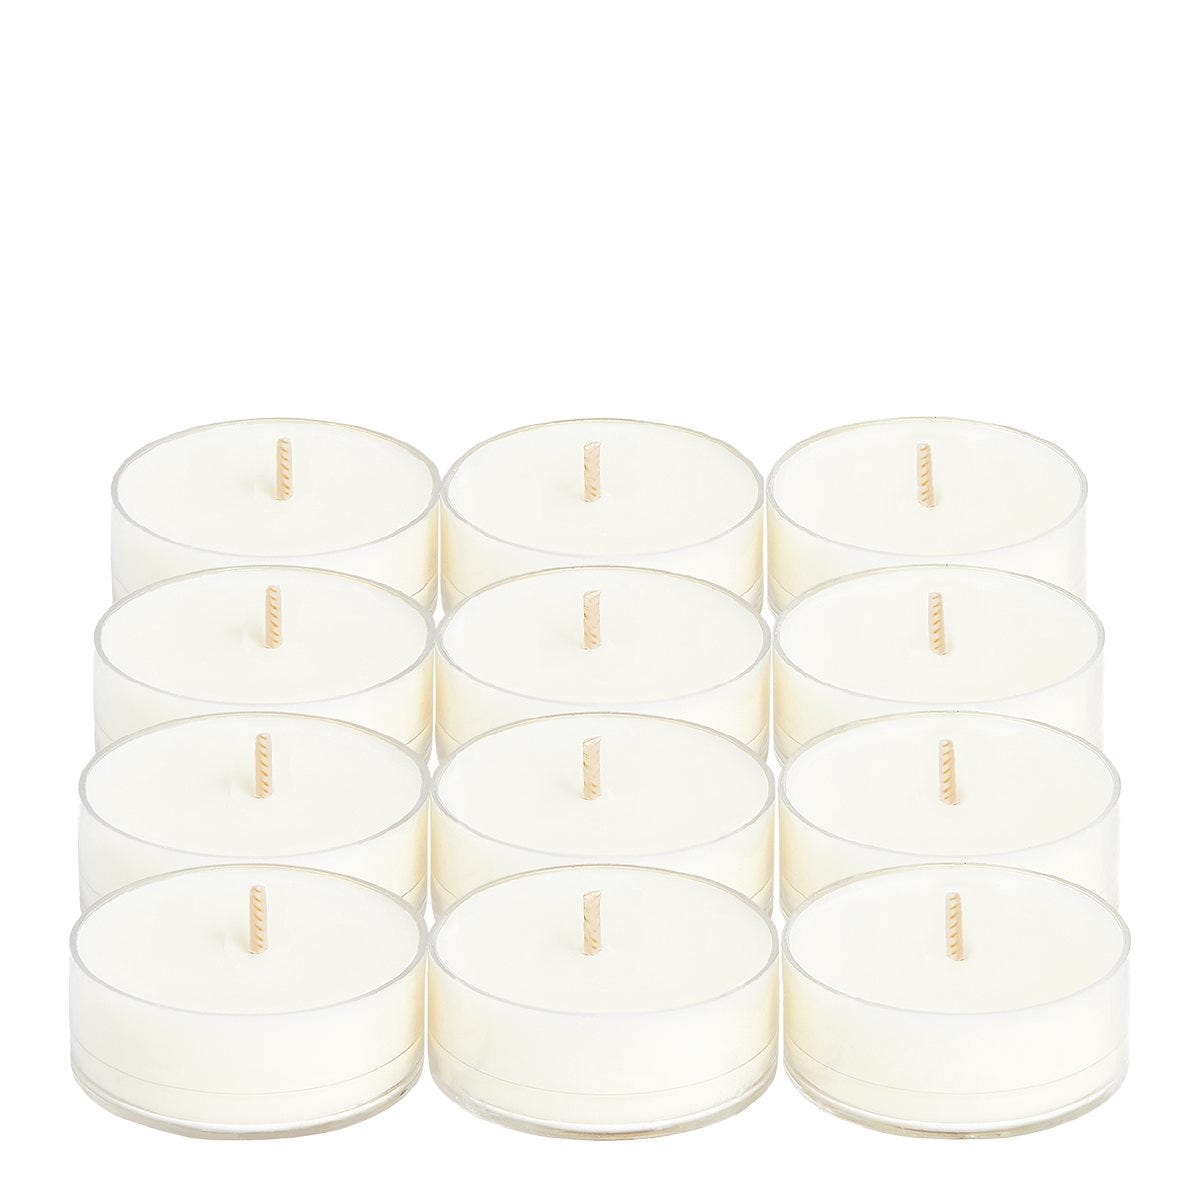 Be Centered Cedarwood + Vanilla 100% Soy Tealight Candles - PartyLite US